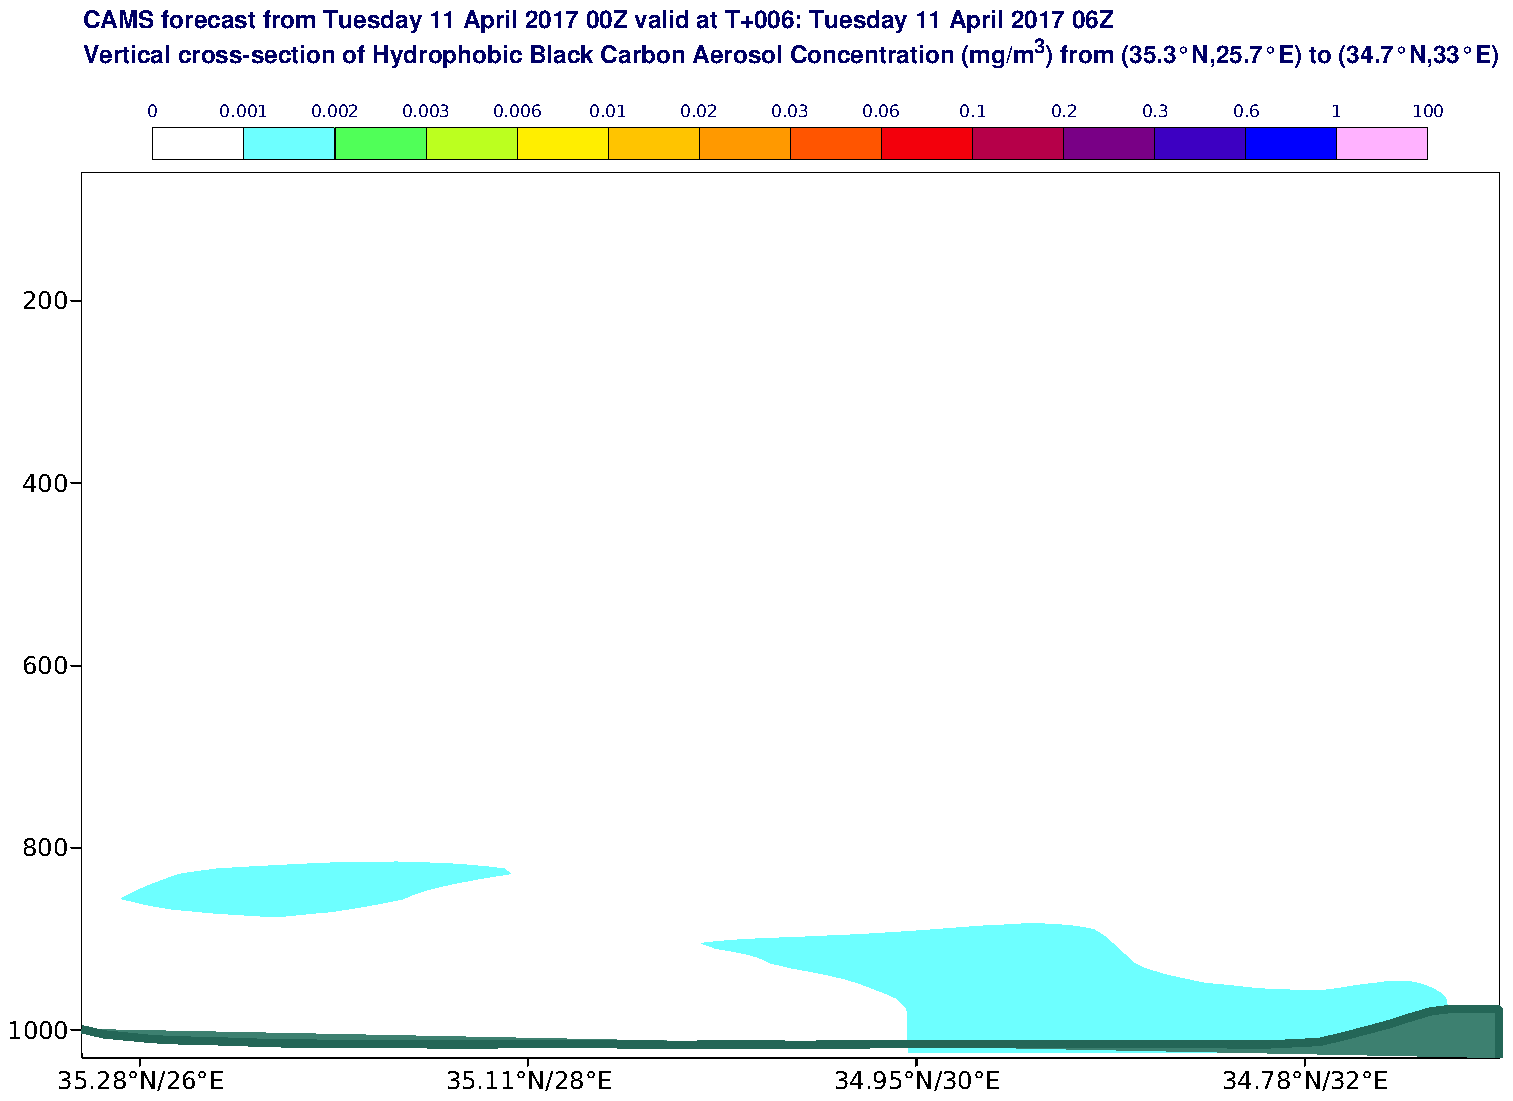 Vertical cross-section of Hydrophobic Black Carbon Aerosol Concentration (mg/m3) valid at T6 - 2017-04-11 06:00